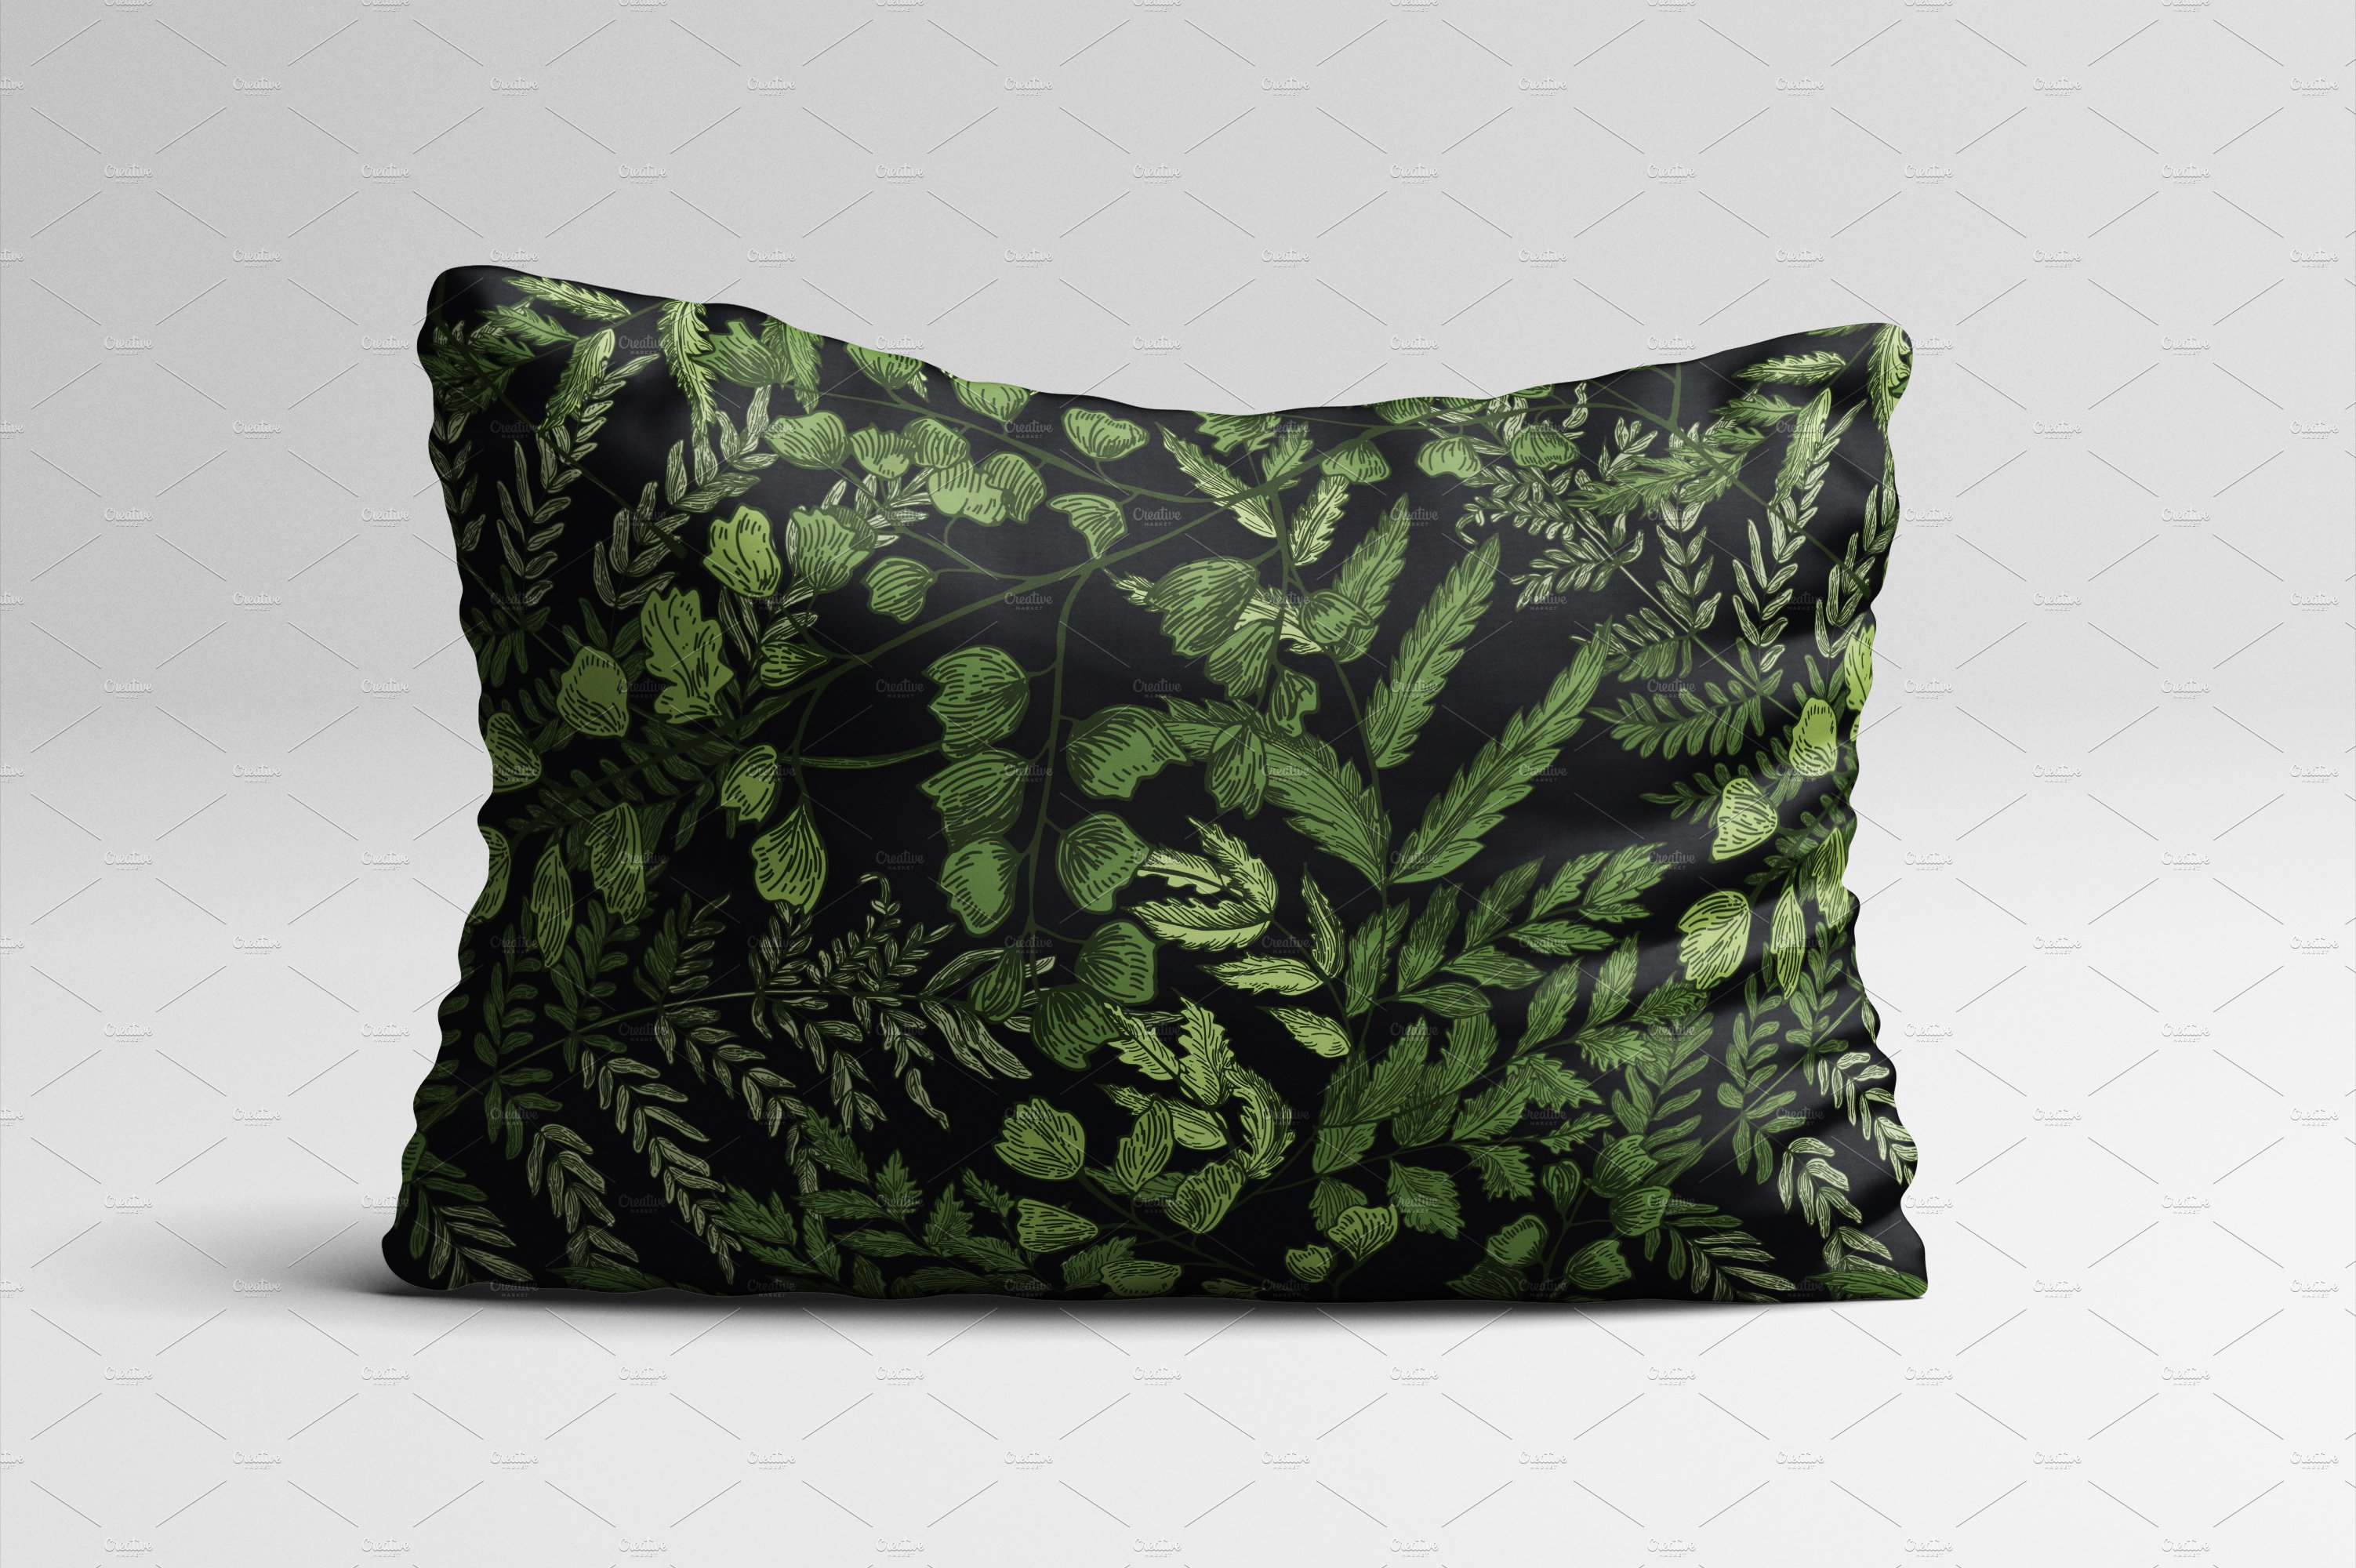 Black and green pillow with green leaves on it.